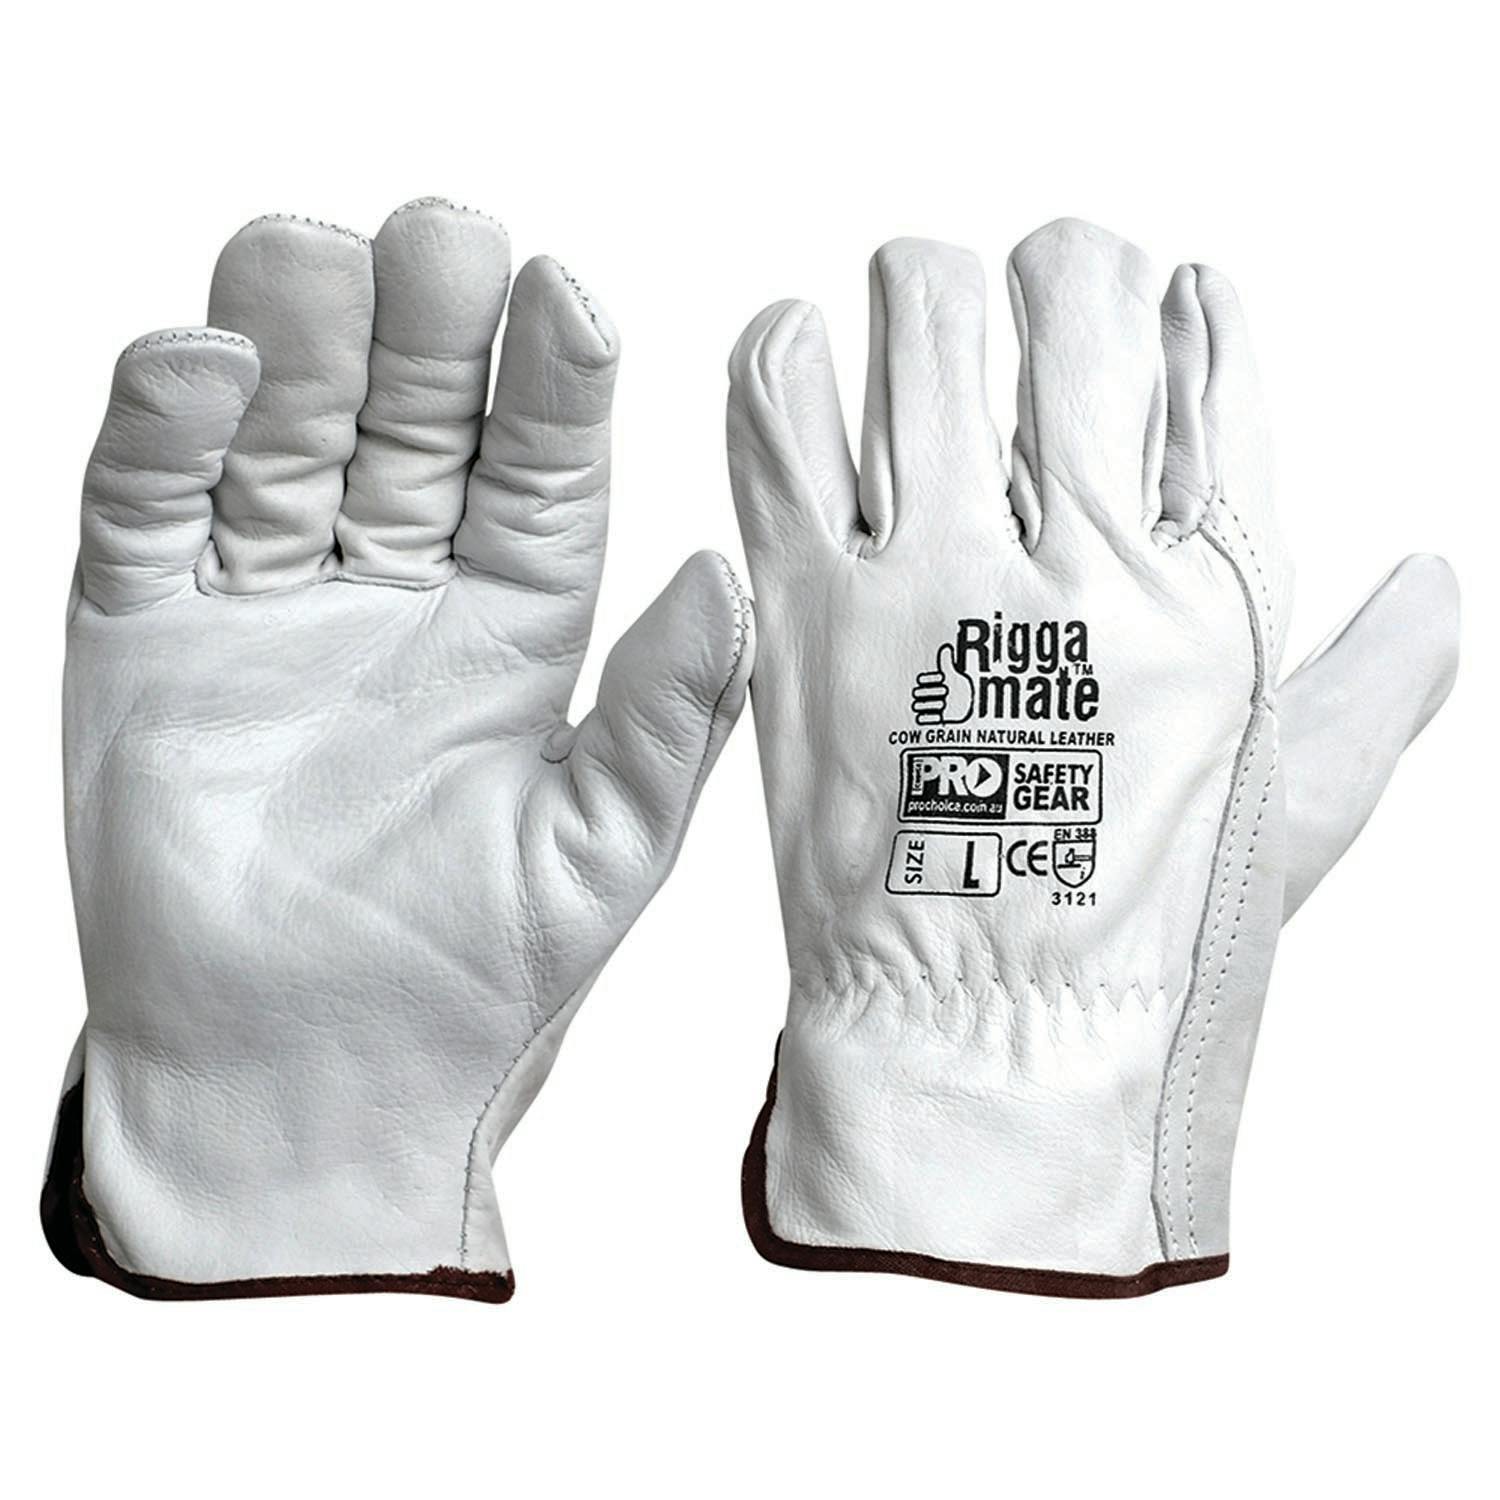 Pro Choice Riggamate Natural Cowgrain Gloves